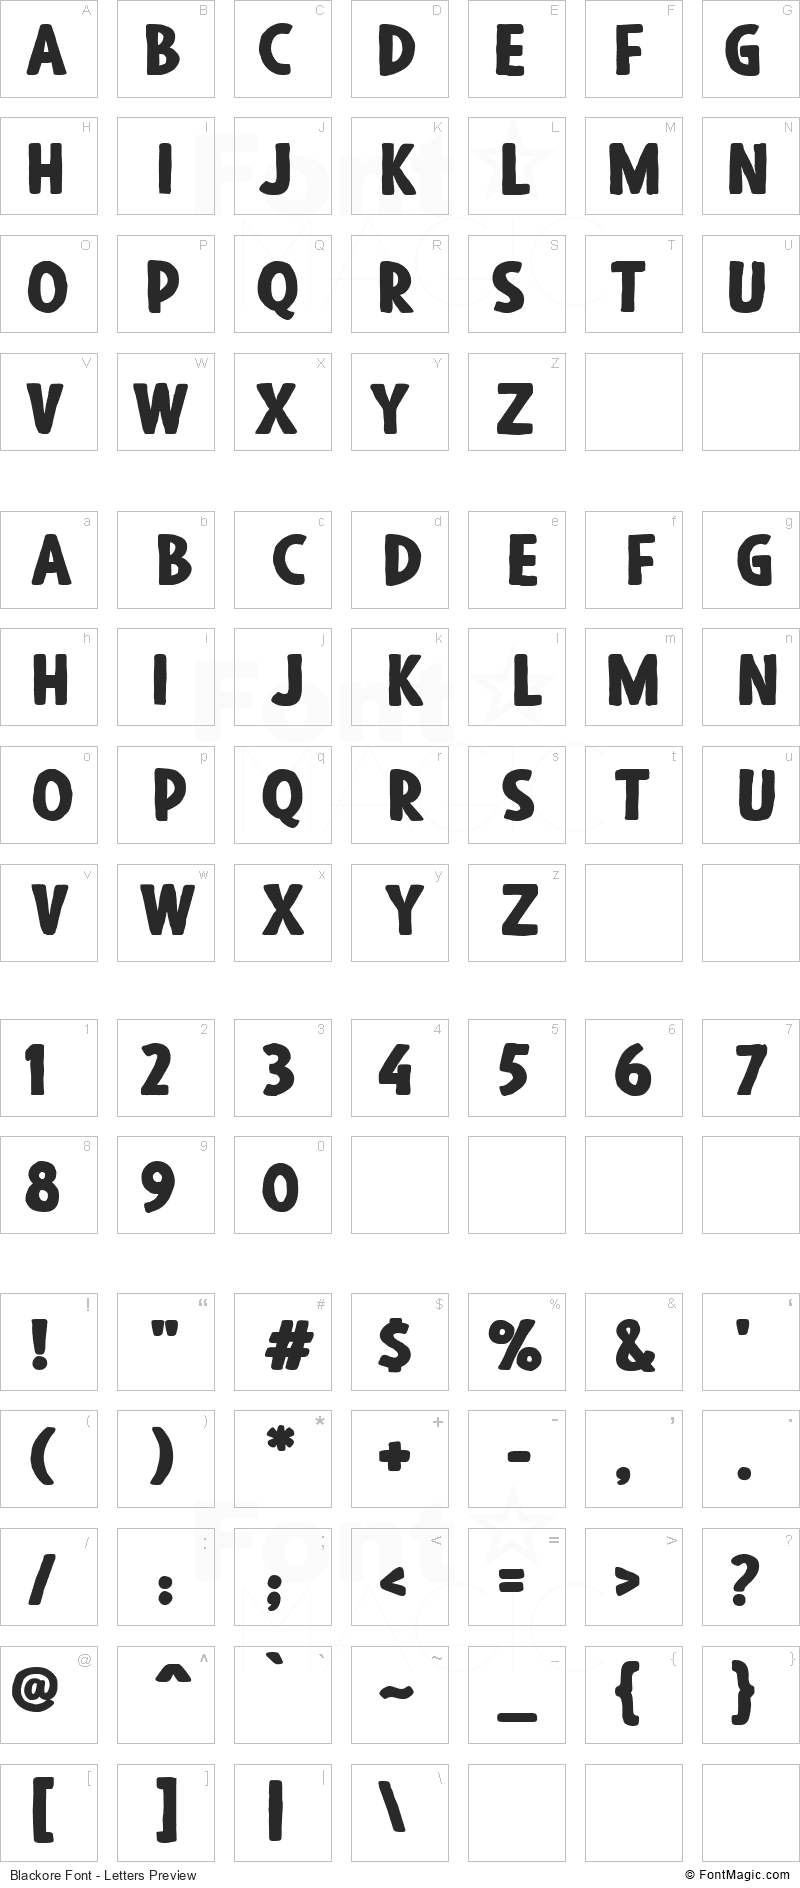 Blackore Font - All Latters Preview Chart